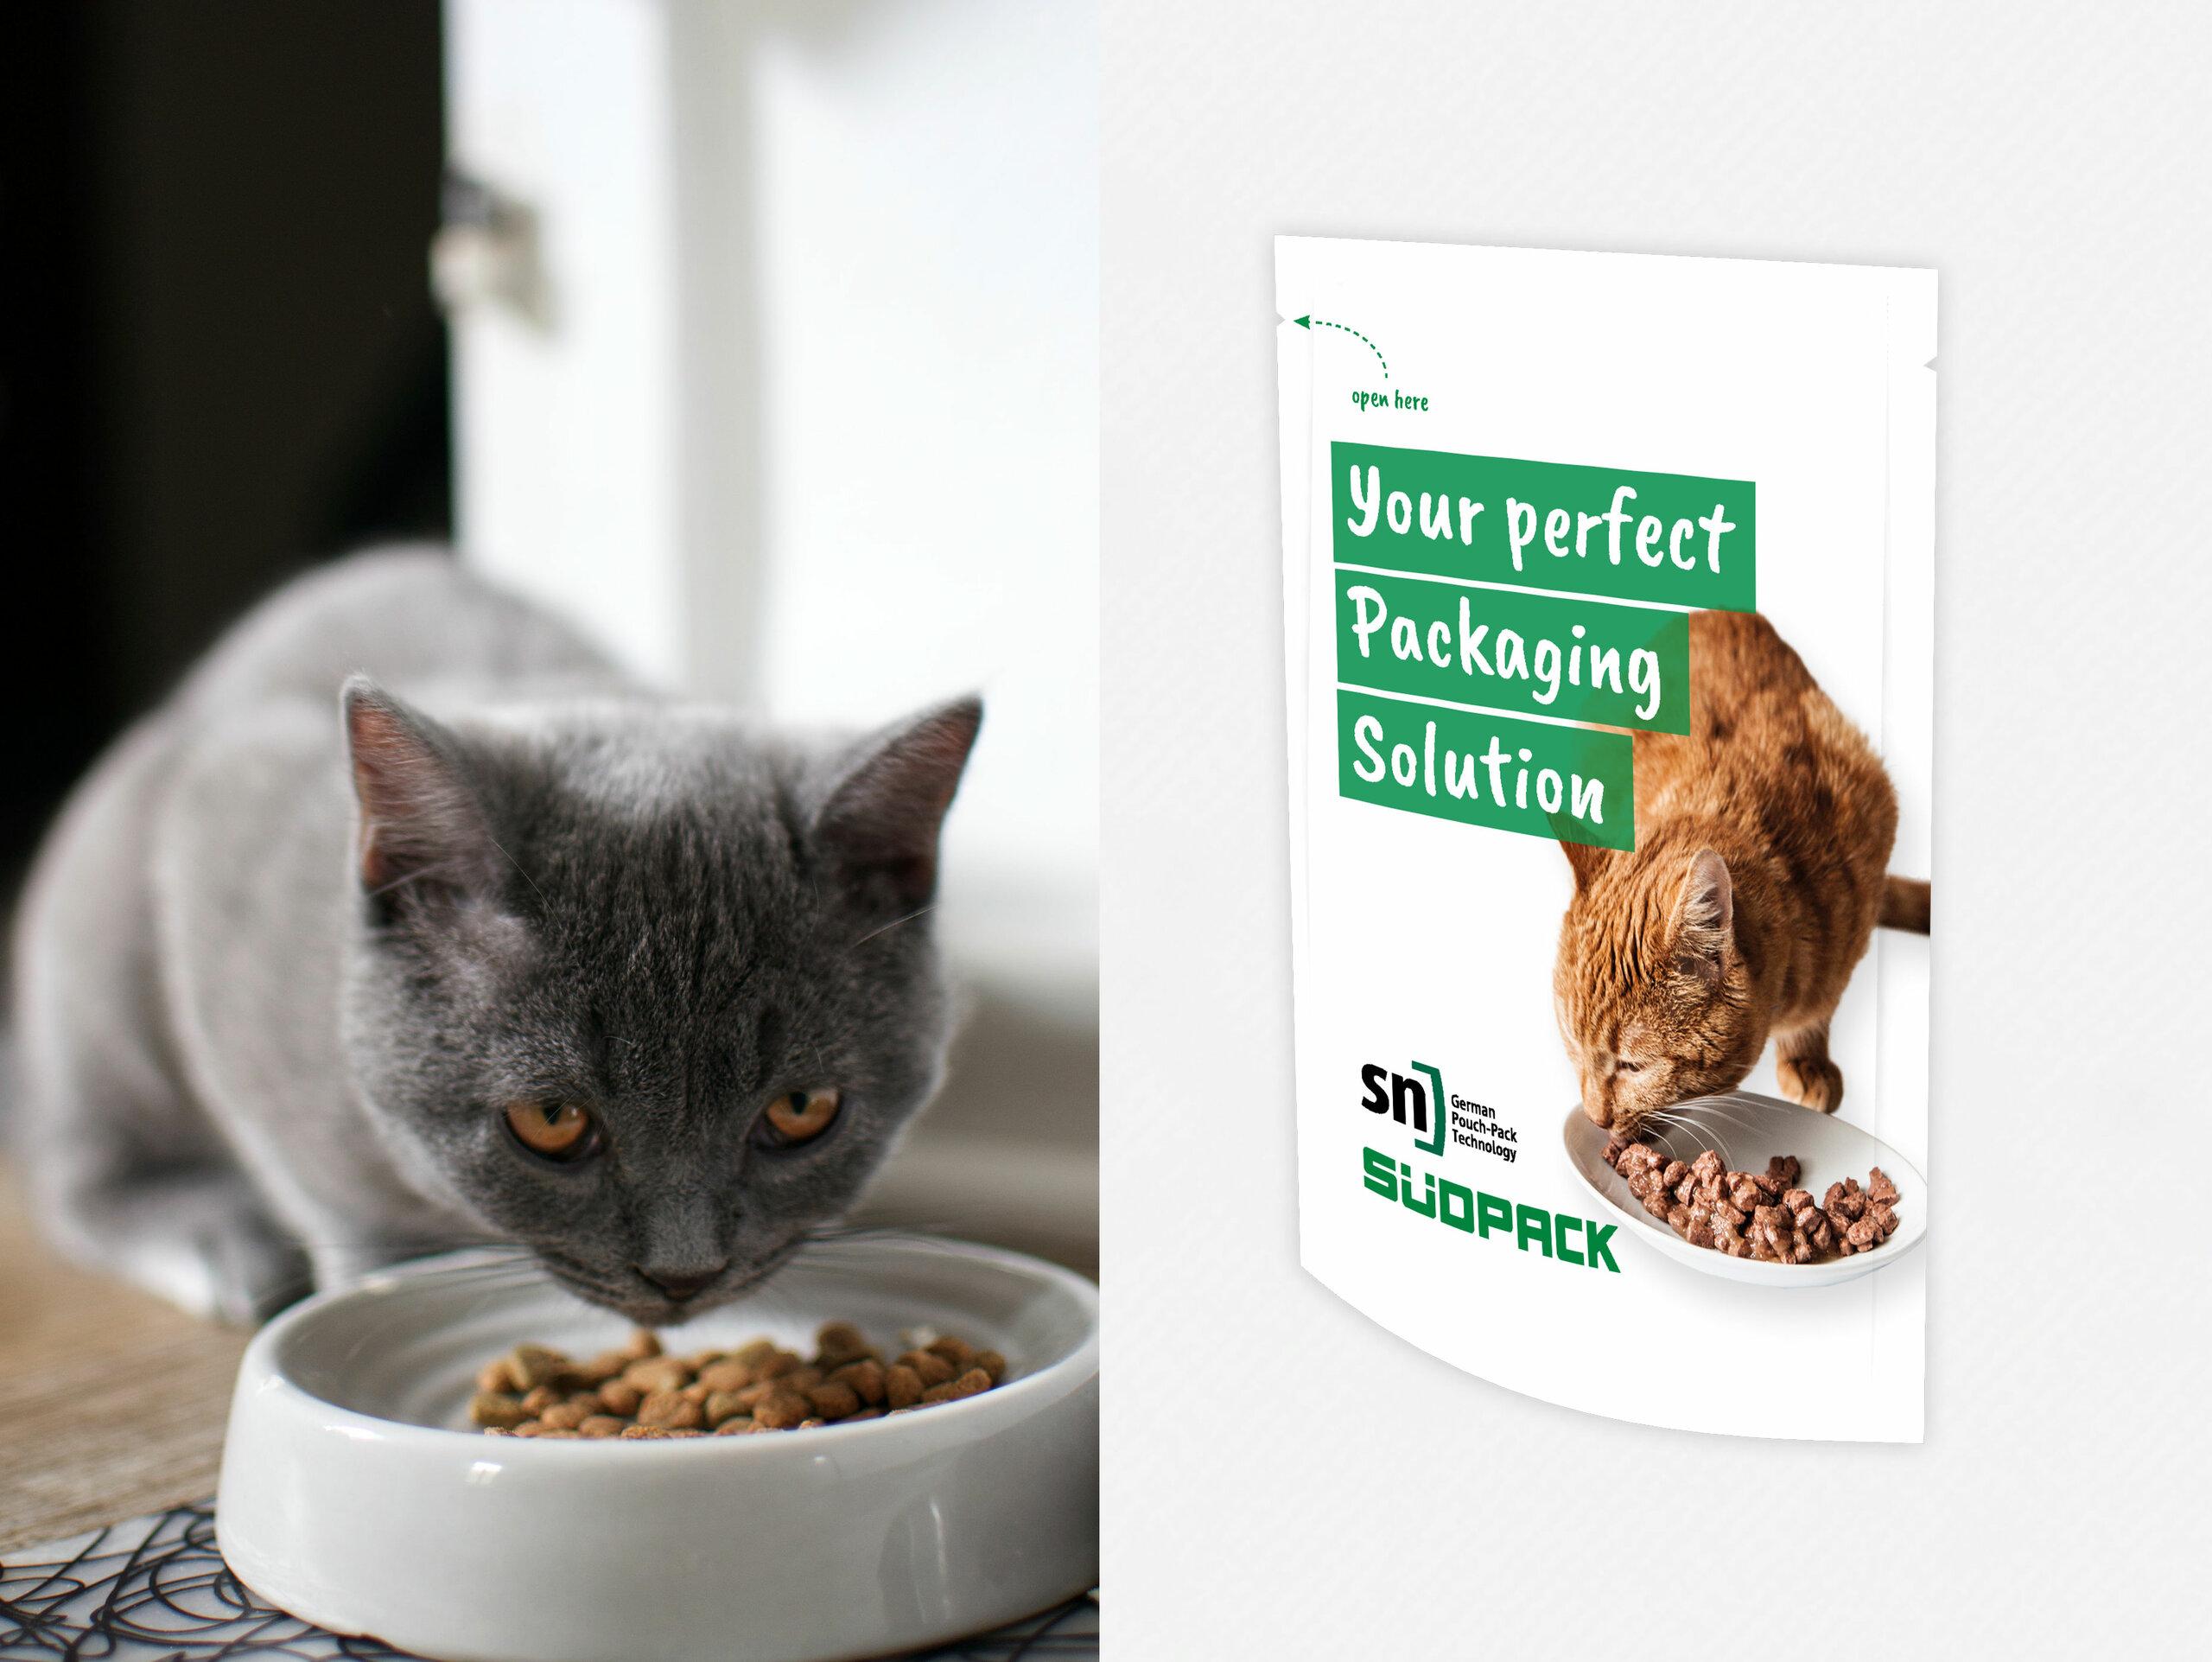 SÜDPACK and SN Maschinenbau at Interzoo in Nuremberg: Aluminum-free packaging solution for wet pet food products on the SN Form-Fill-Seal Machine FME 50